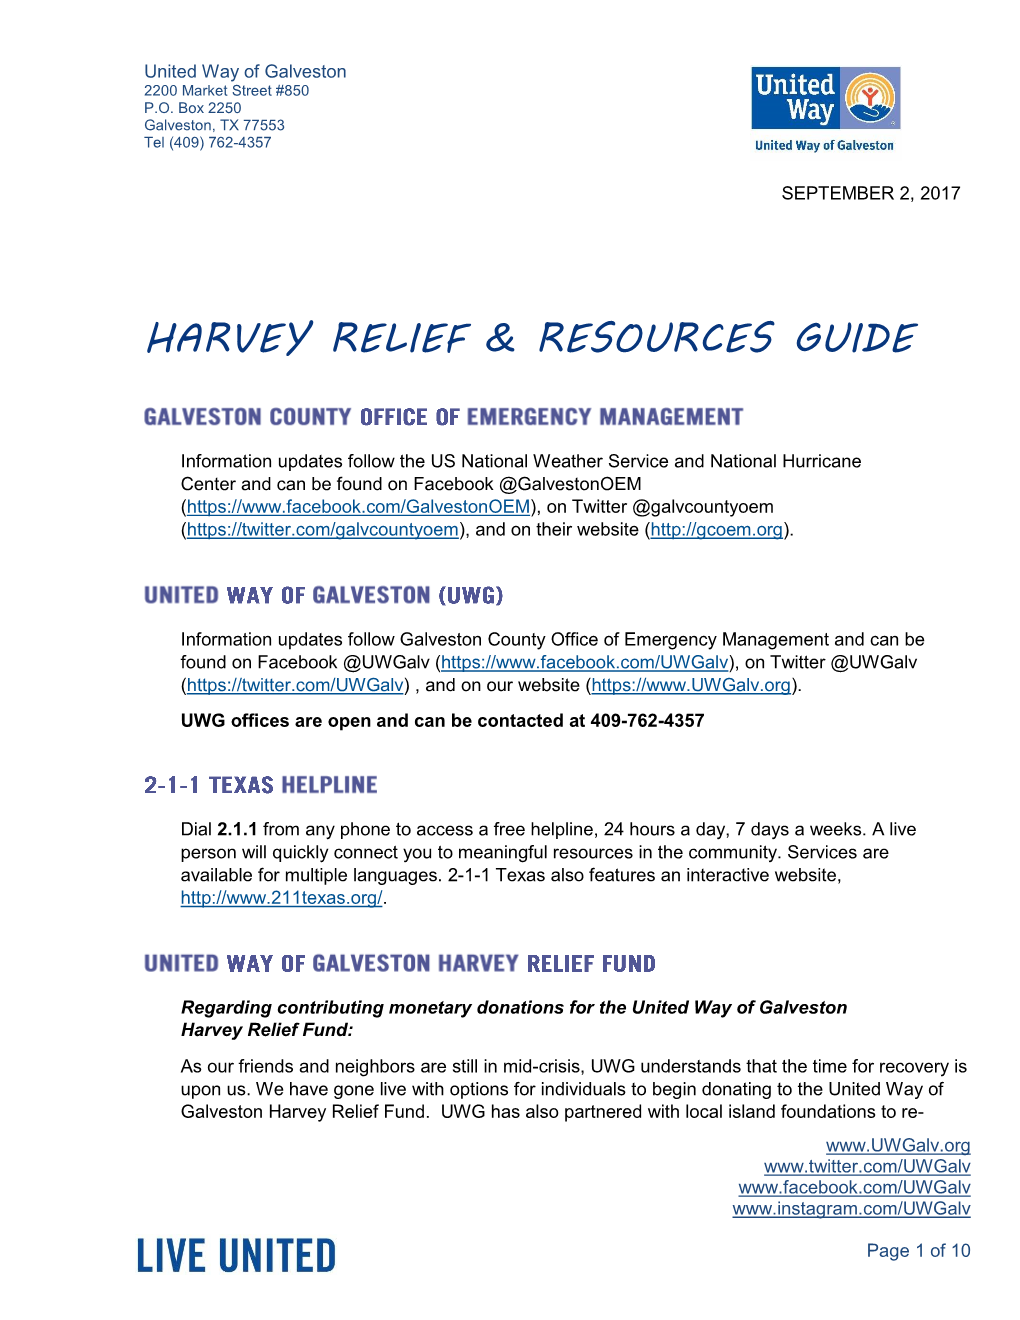 Harvey Relief & Resources Guide